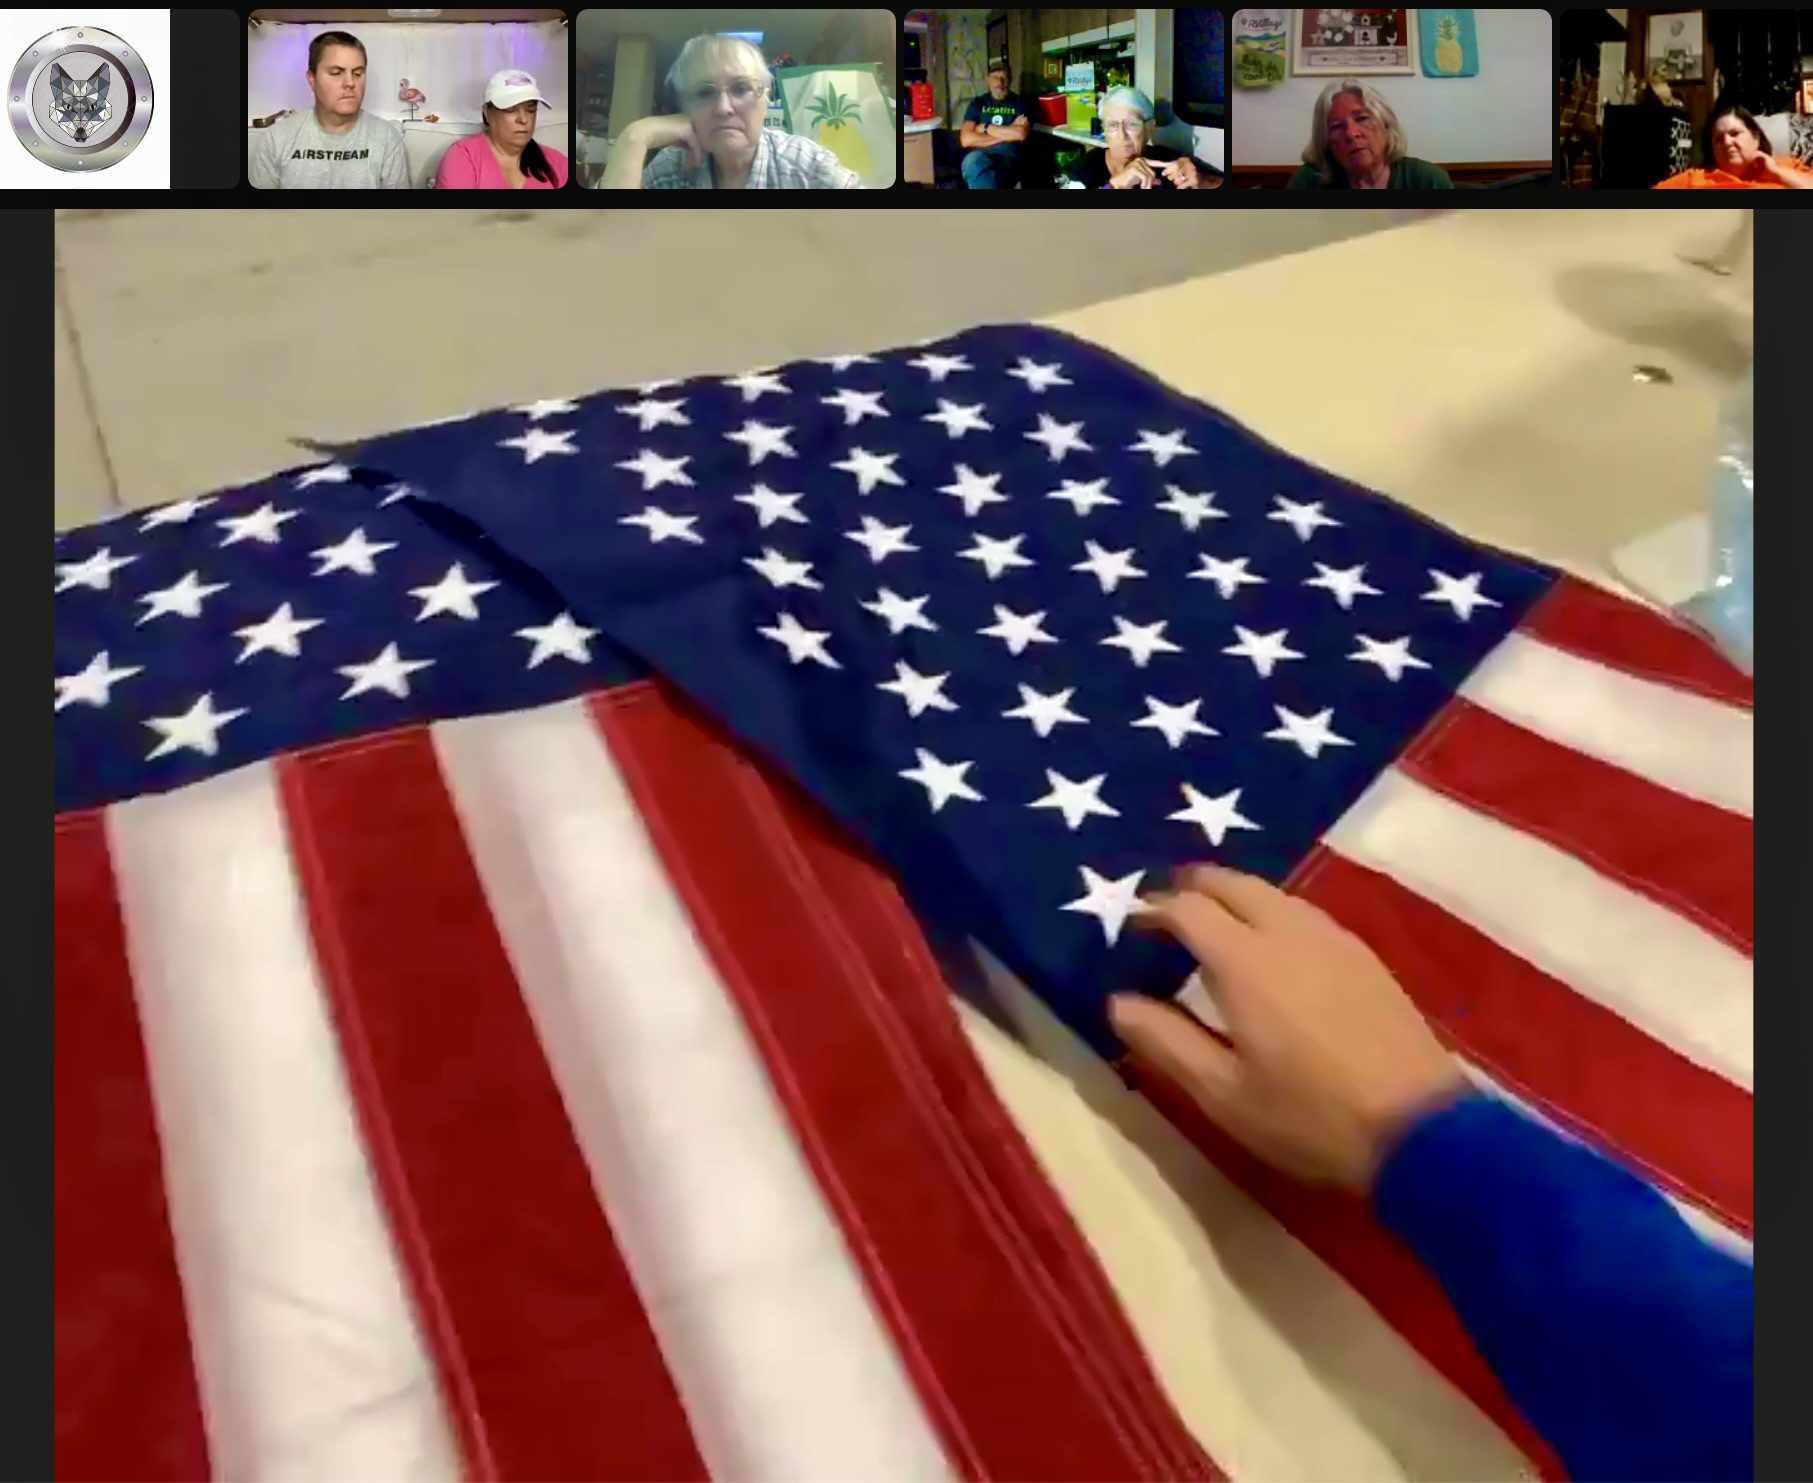 Online Zoom tour of Allegiance Flag Company - flags made in USA